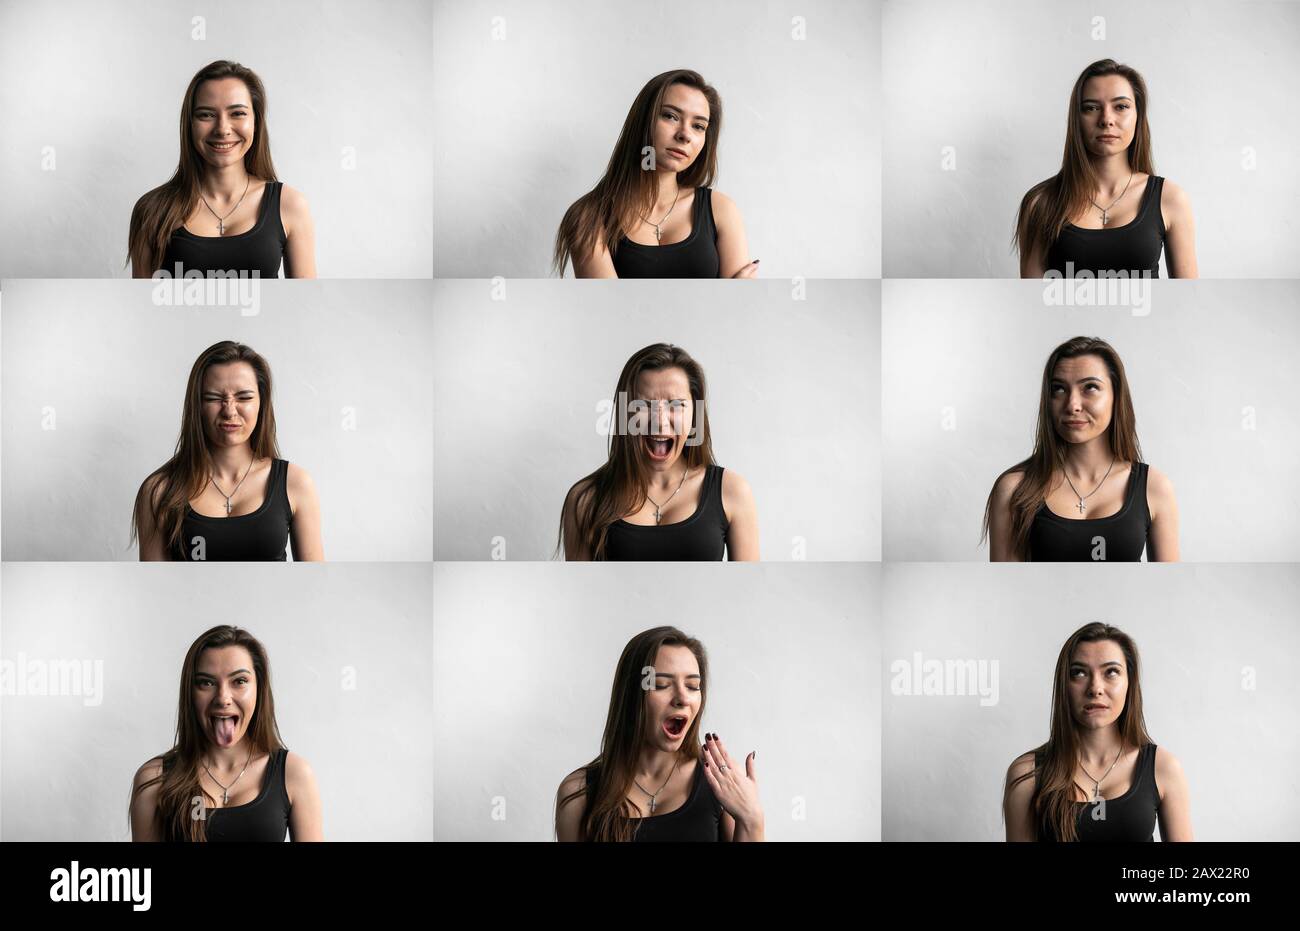 Set of young woman's portraits with different emotions. Young beautiful cute girl showing different emotions. Laughing, smiling, anger, suspicion Stock Photo